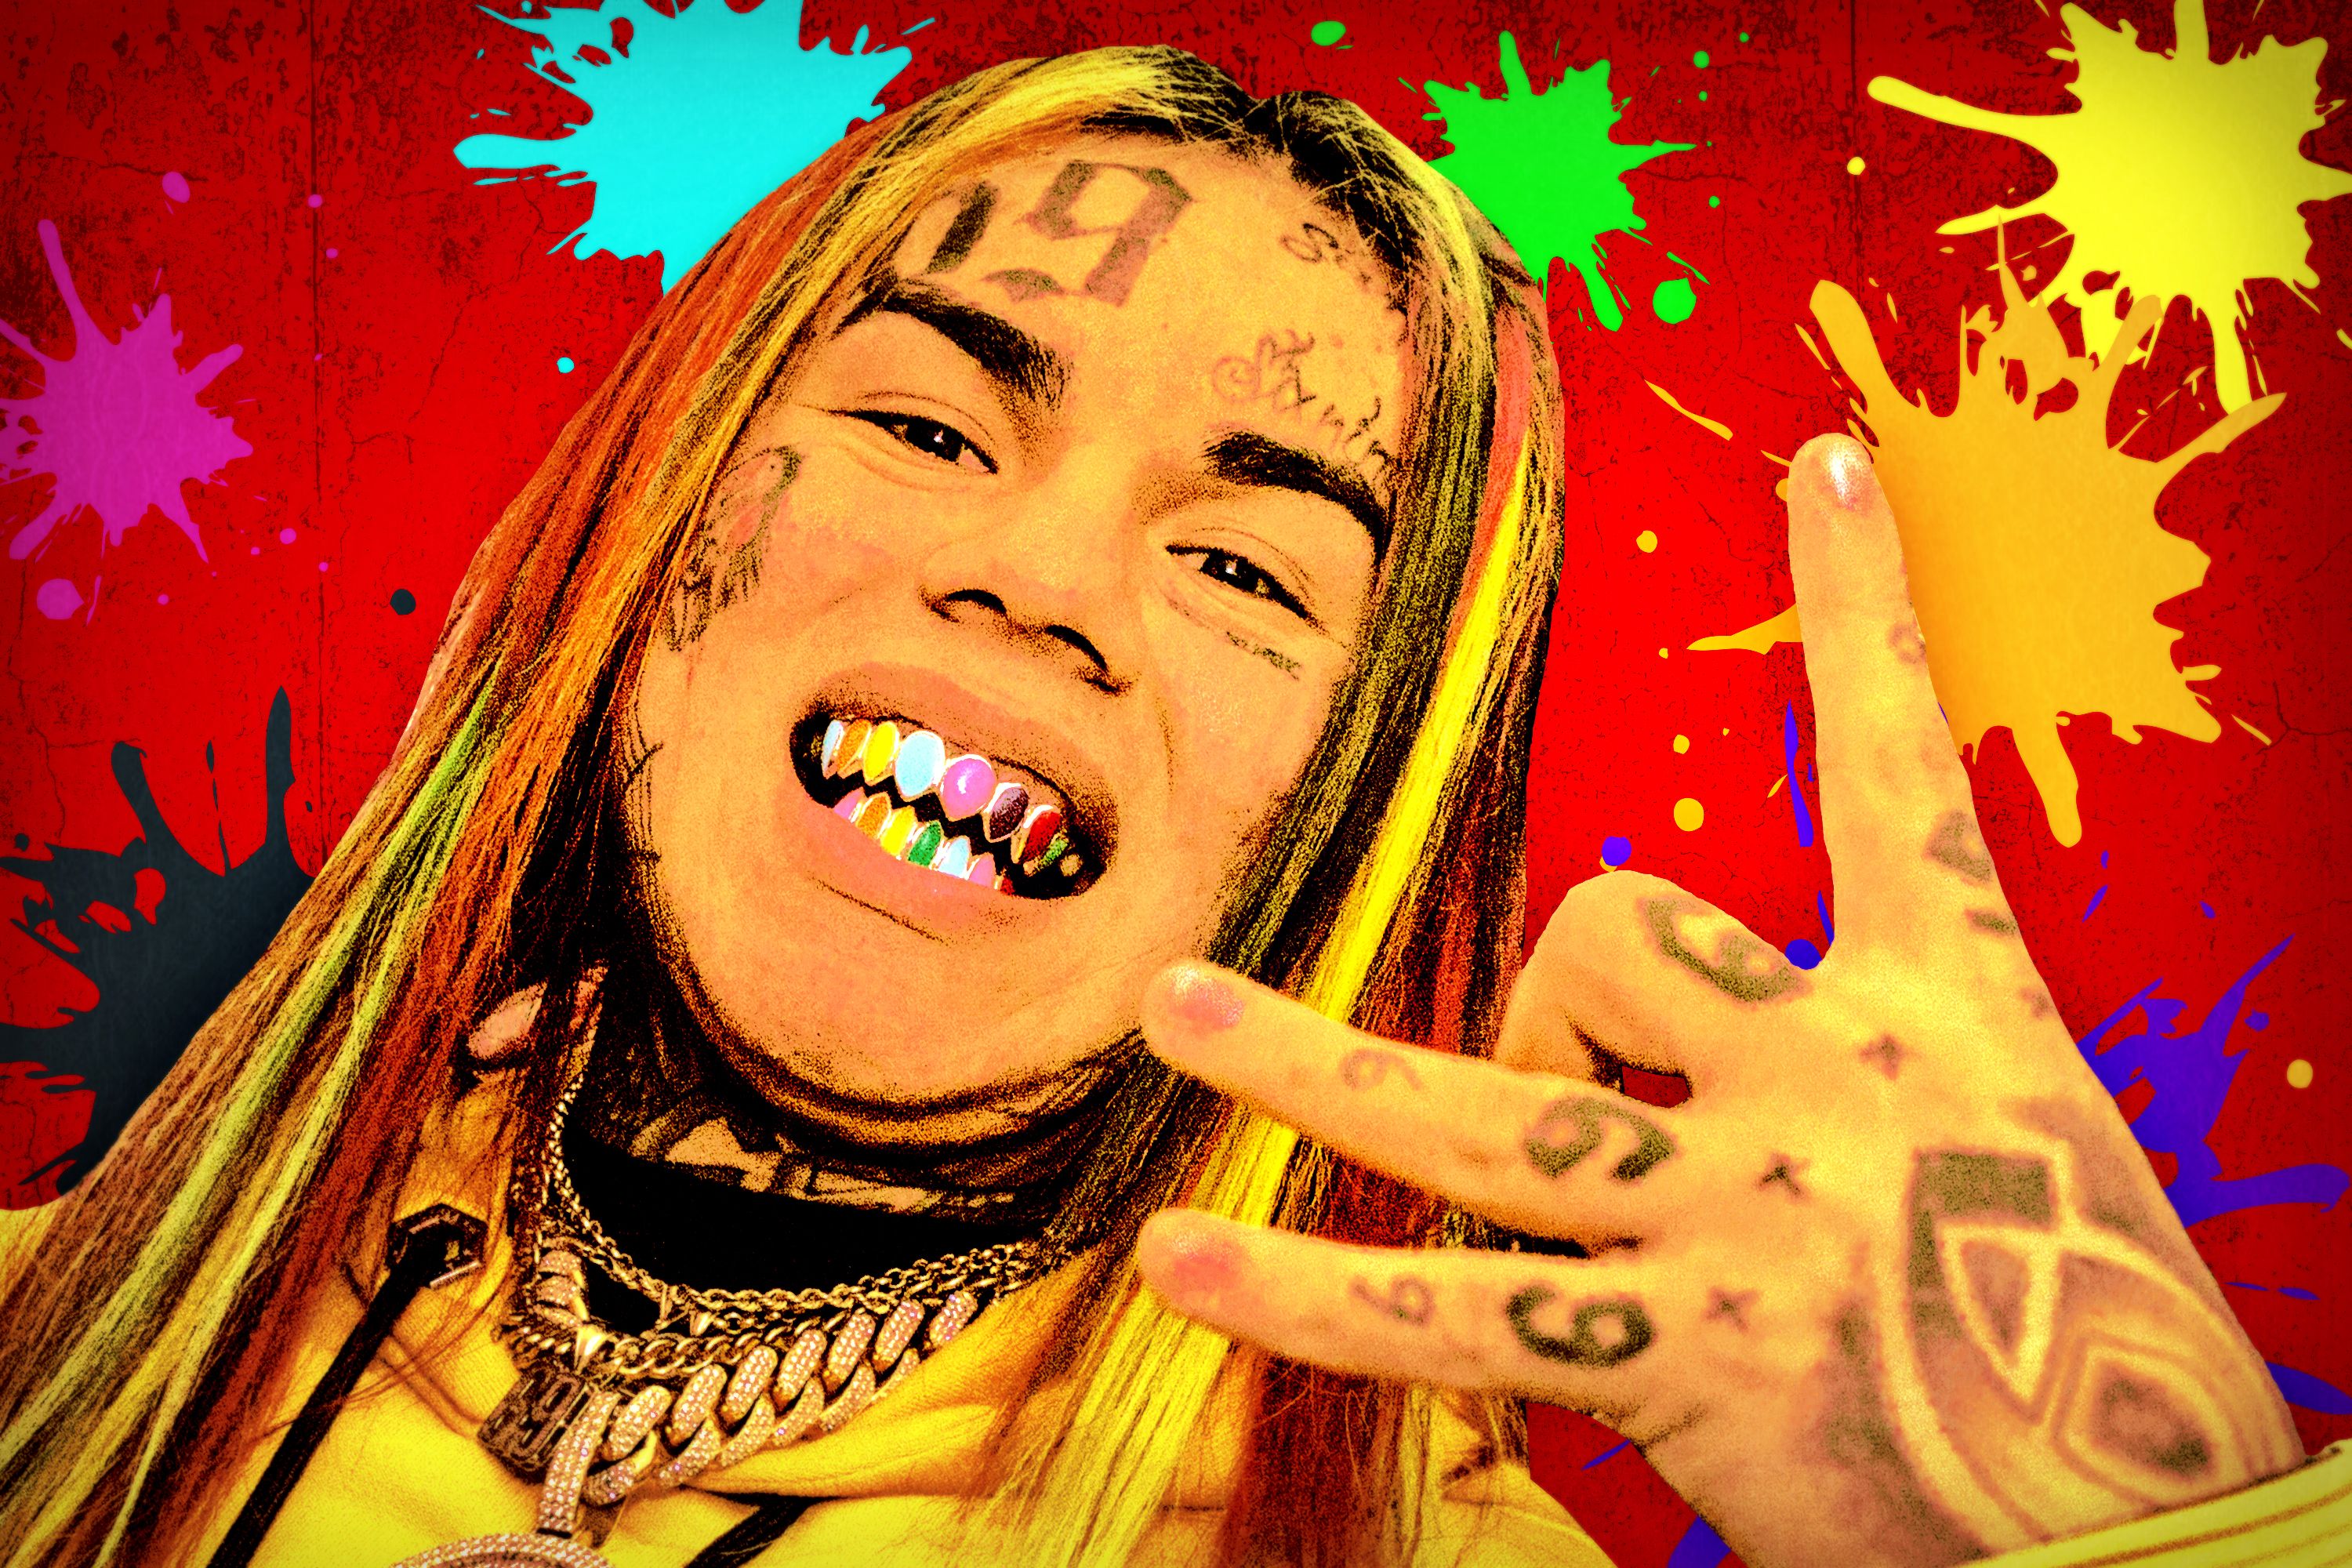 Meet 6ix9ine: The First Rap Star of 2018 Is Easy to Hate, Impossible